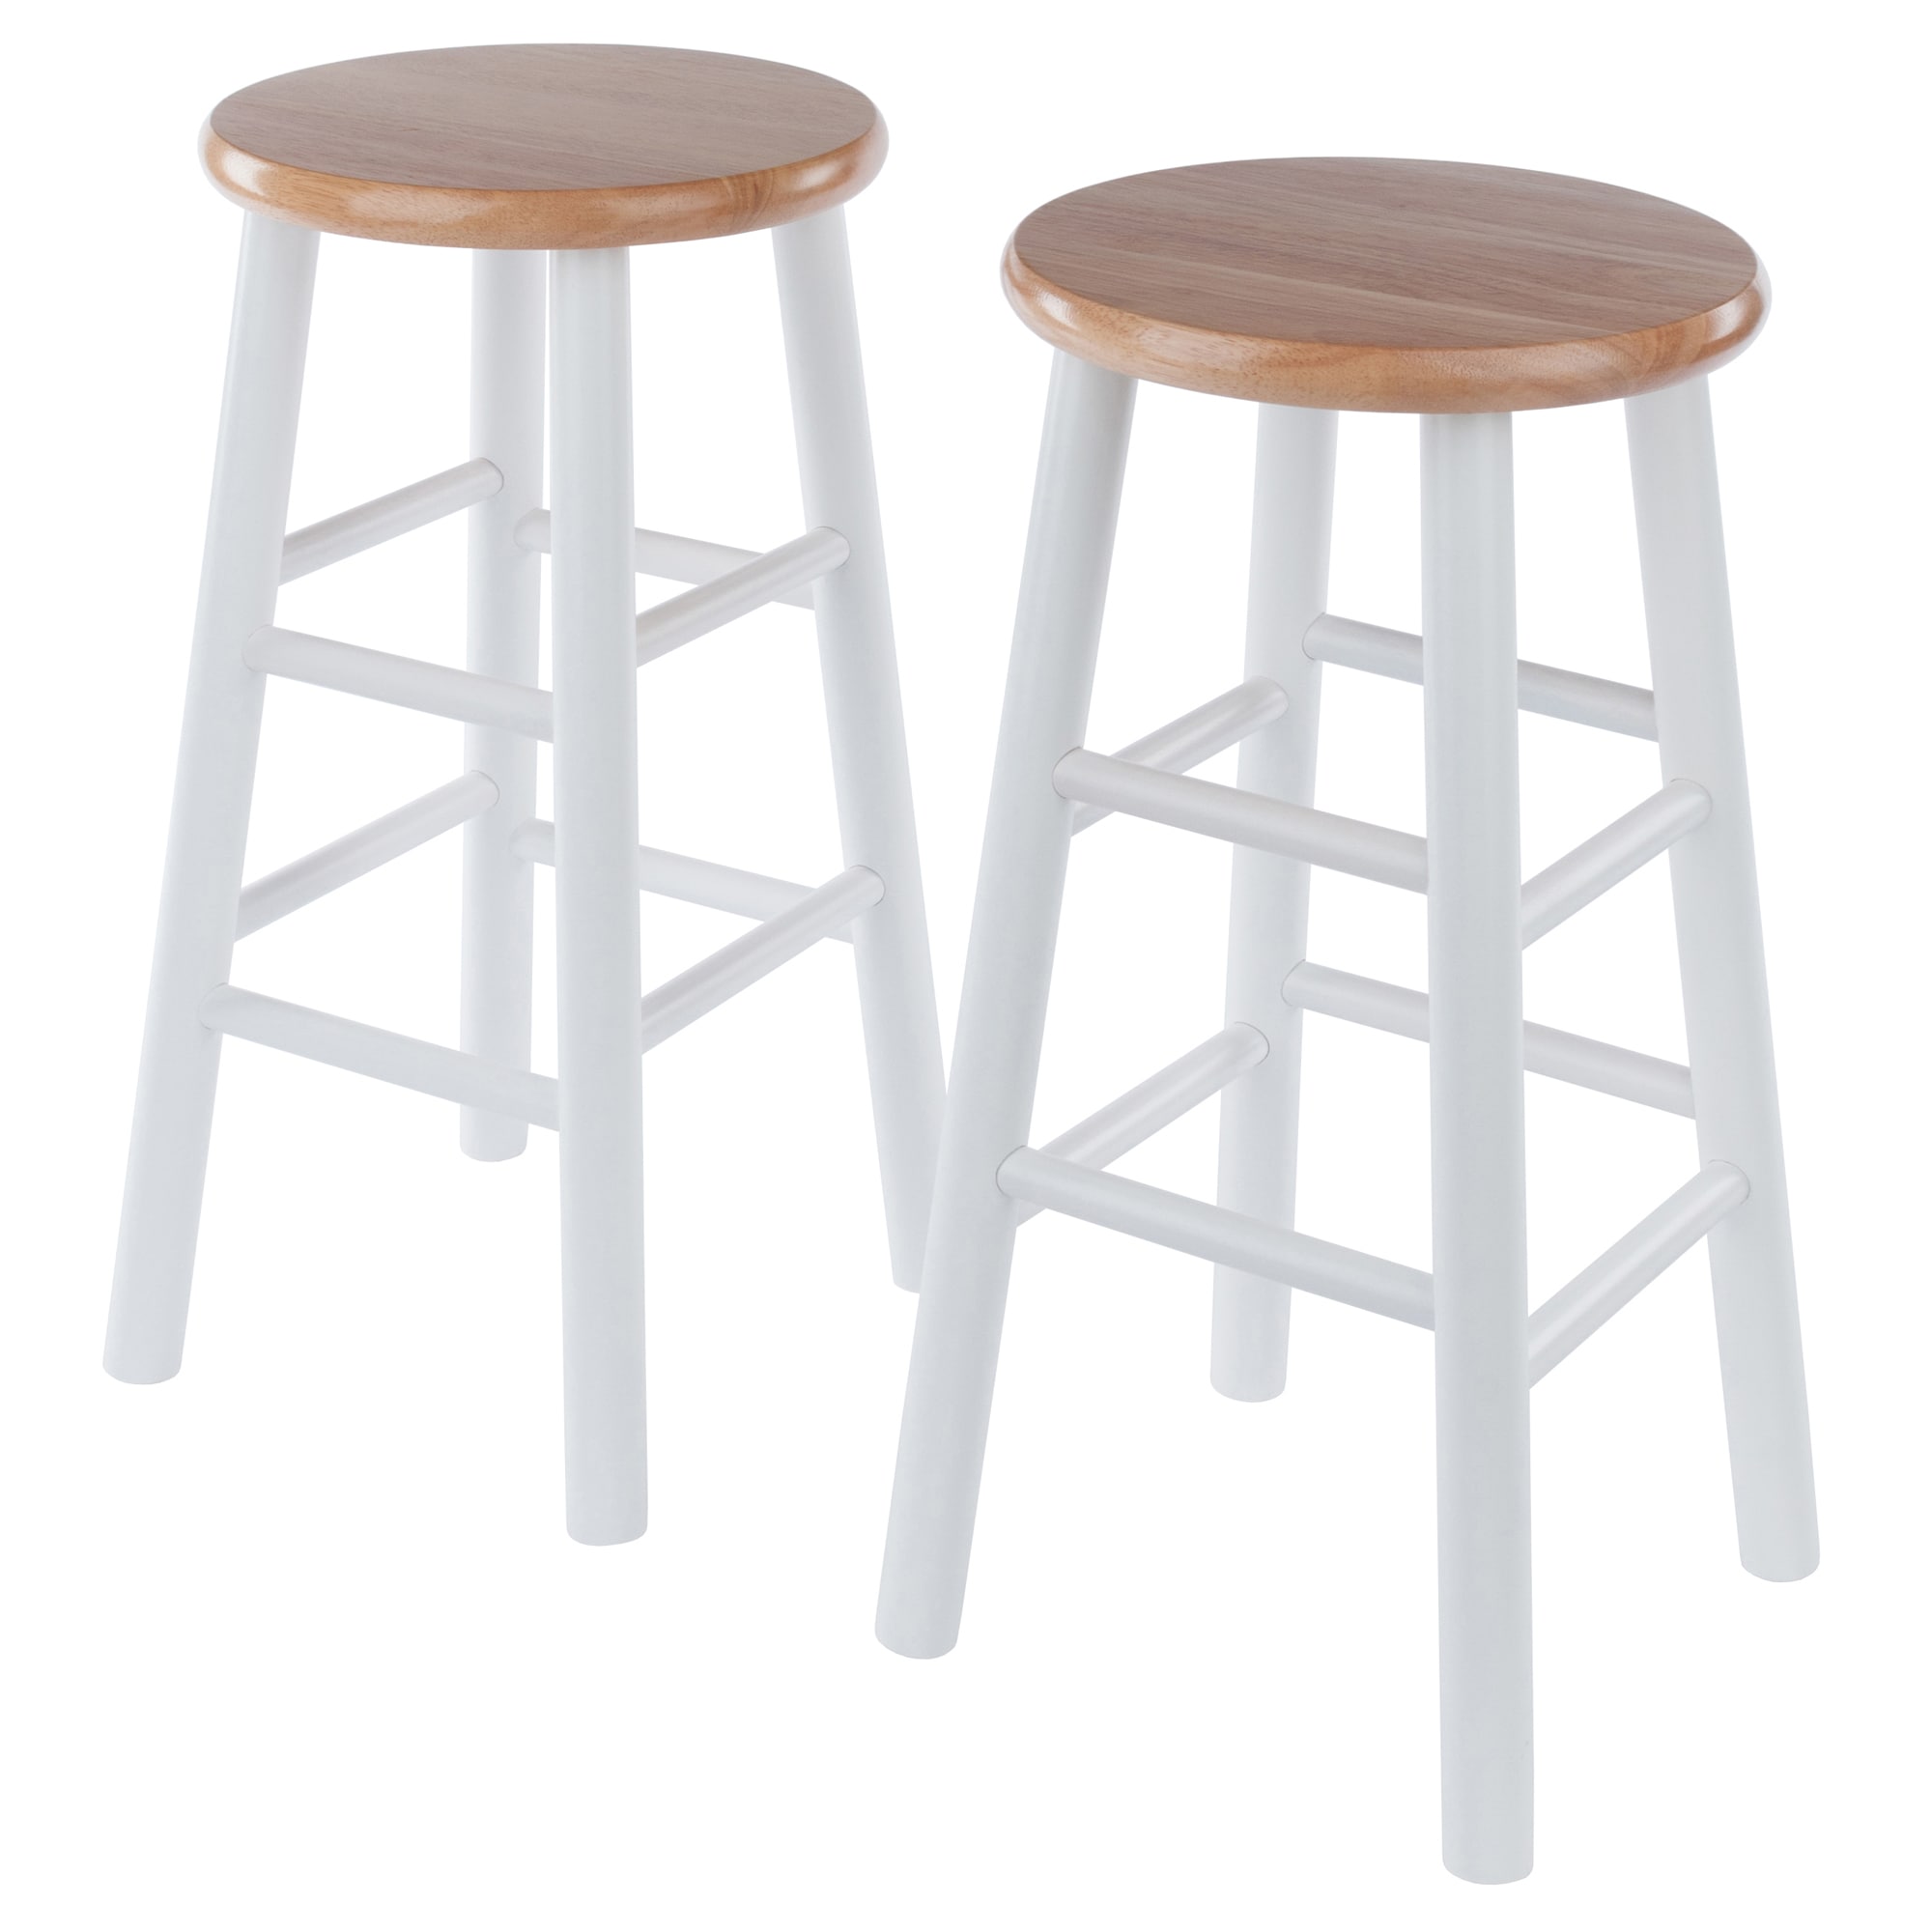 Bar Stool In The Stools, How To Shorten Wooden Bar Stool Legs